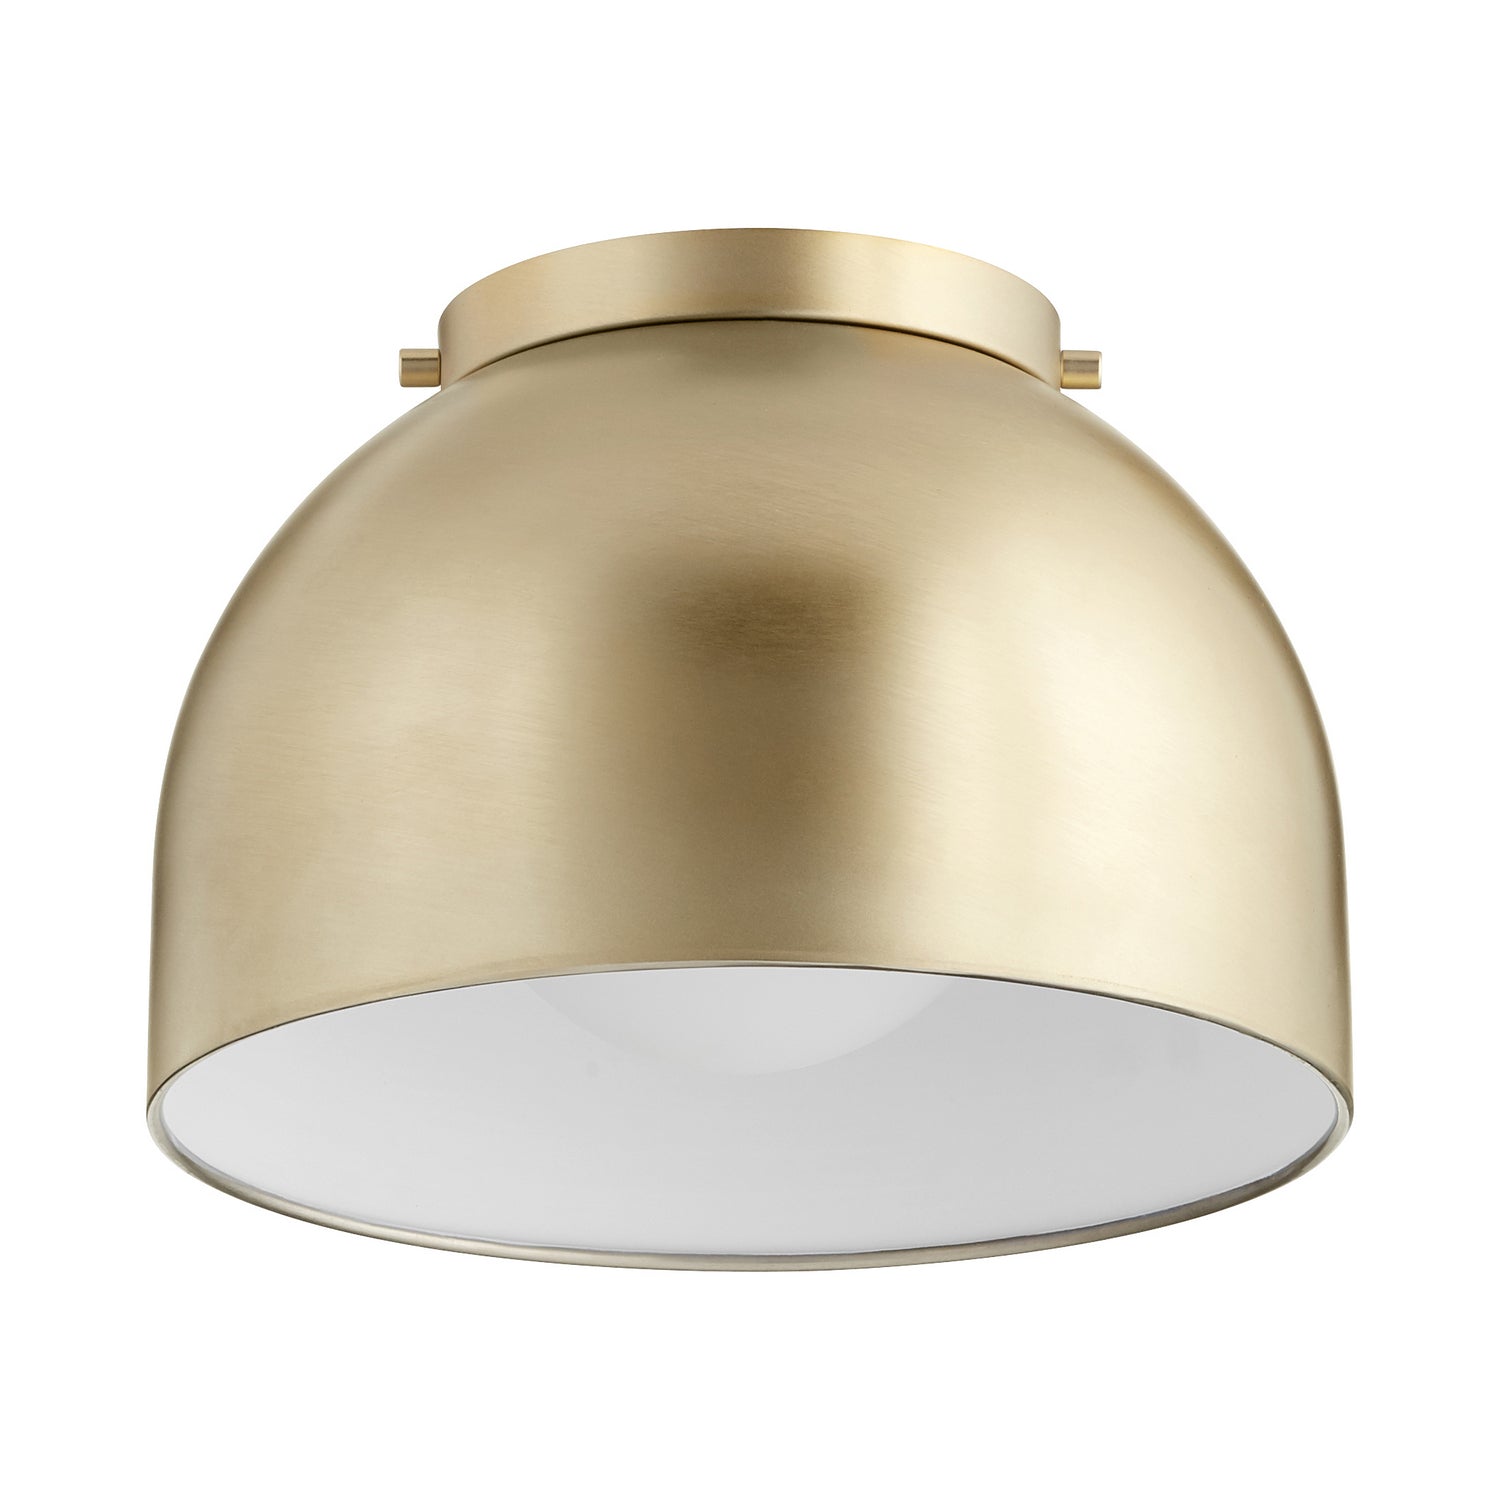 Quorum - 3004-11-80 - One Light Ceiling Mount - 3004 Ceiling Mounts - Aged Brass